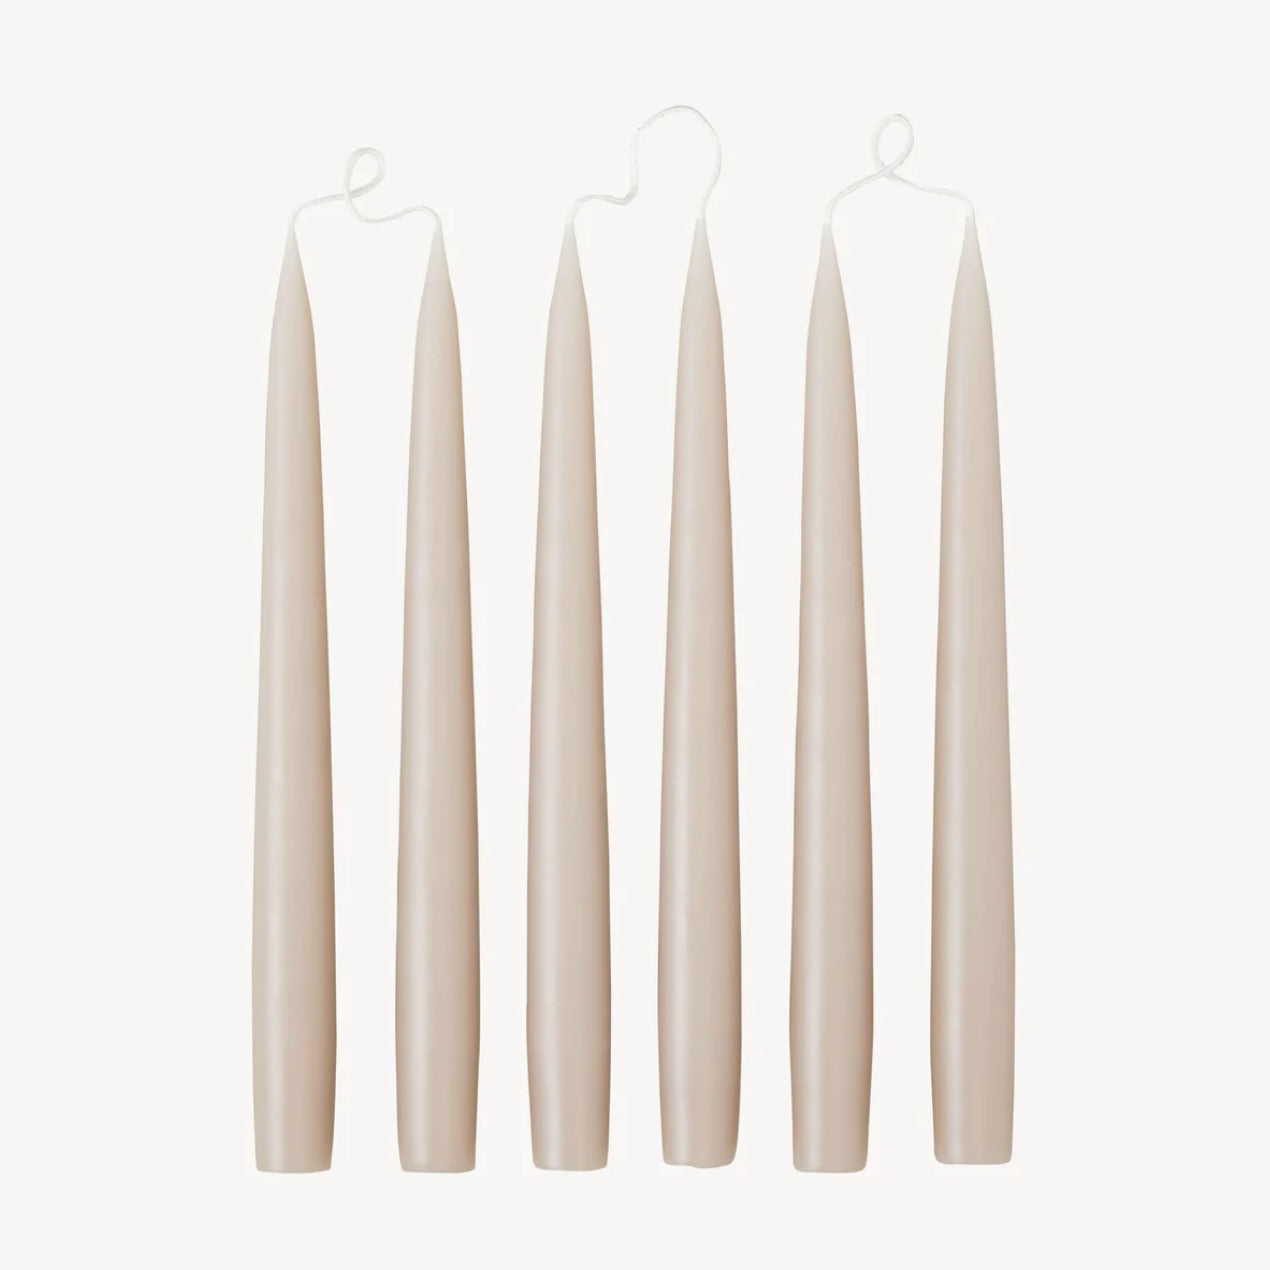 Latte taper candles - pair - The Bristol Artisan Handmade Sustainable Gifts and Homewares.